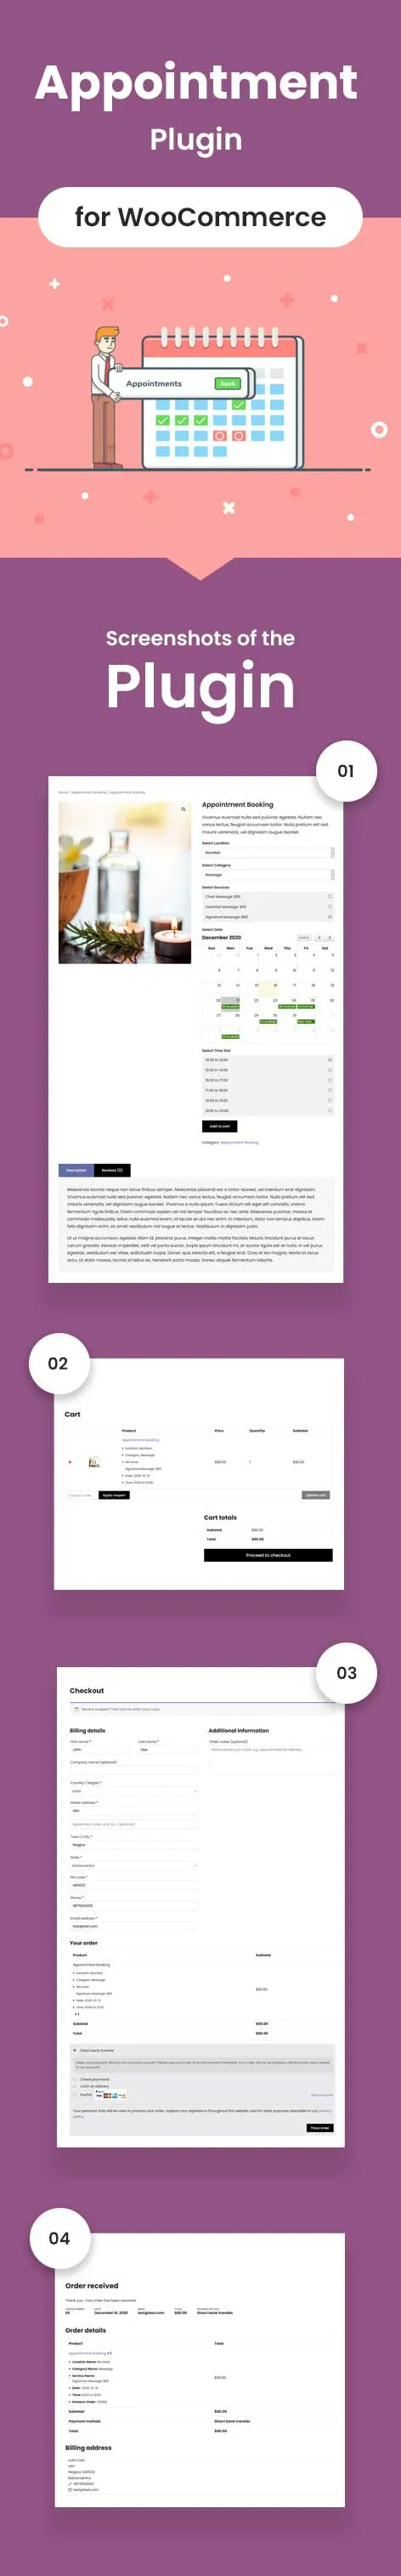 woocommerce appointment plugin scaled